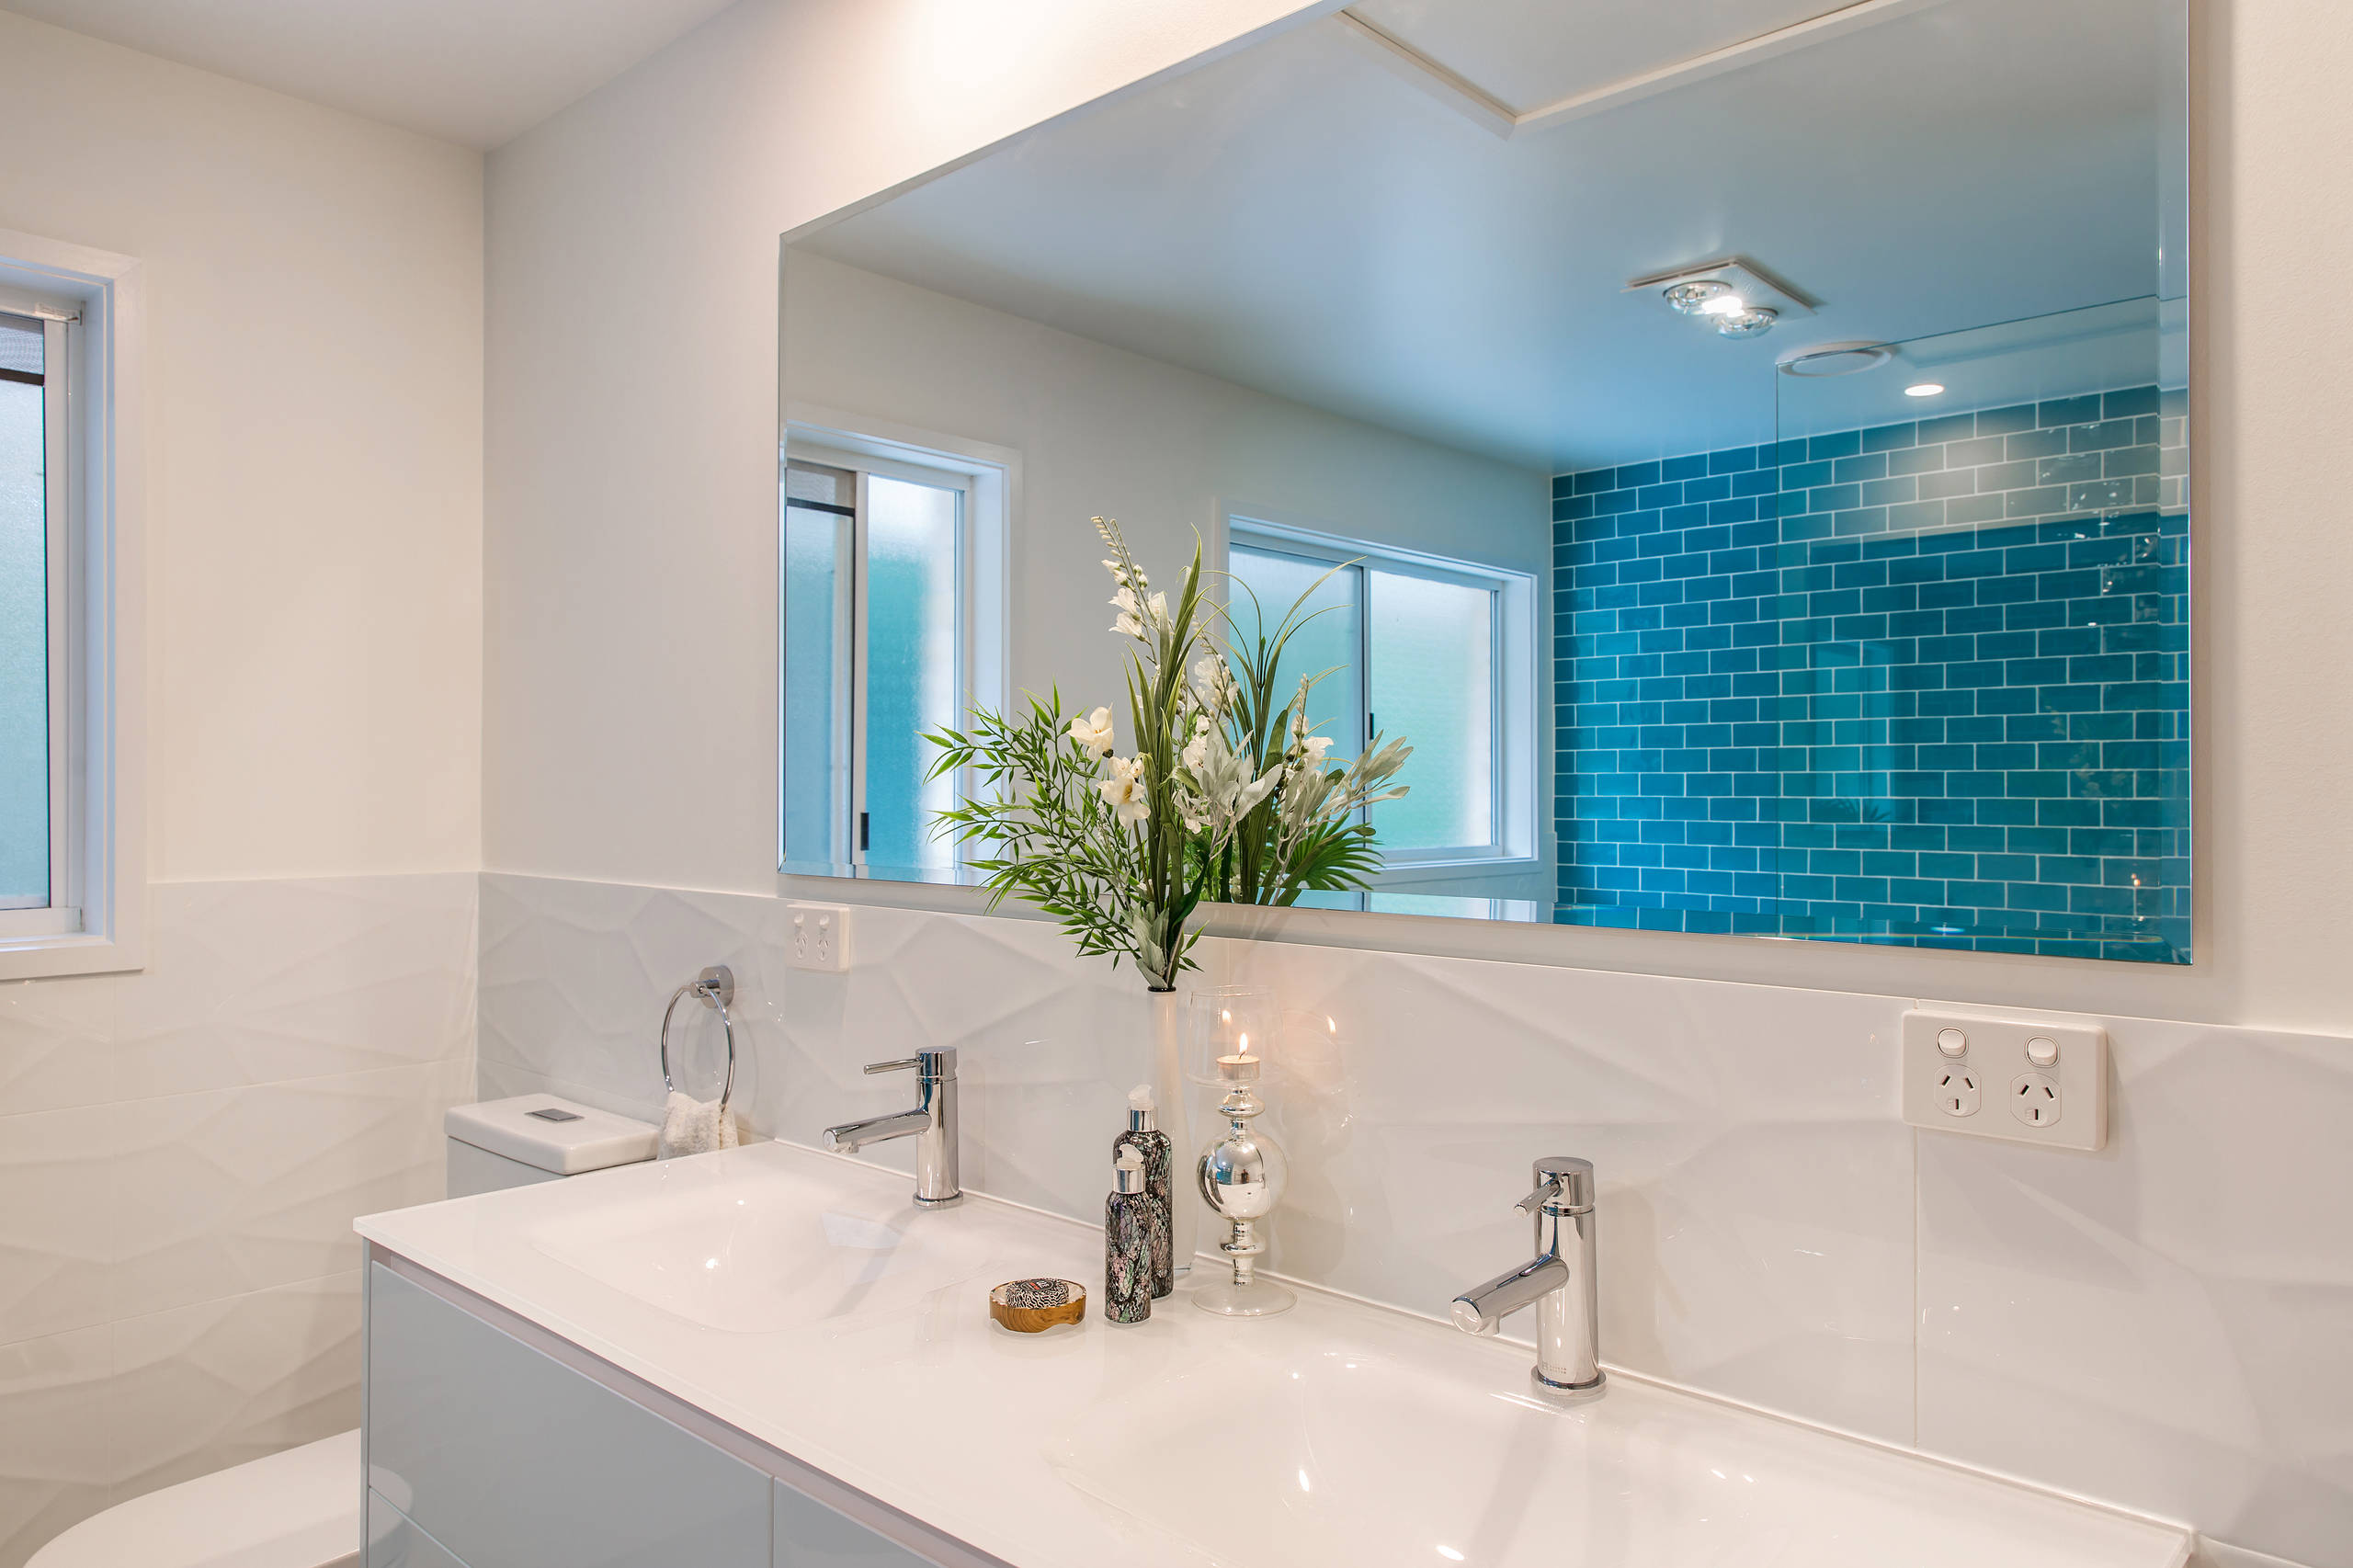 Chapel Hill Ensuite & Family Bathroom Design and Renovation